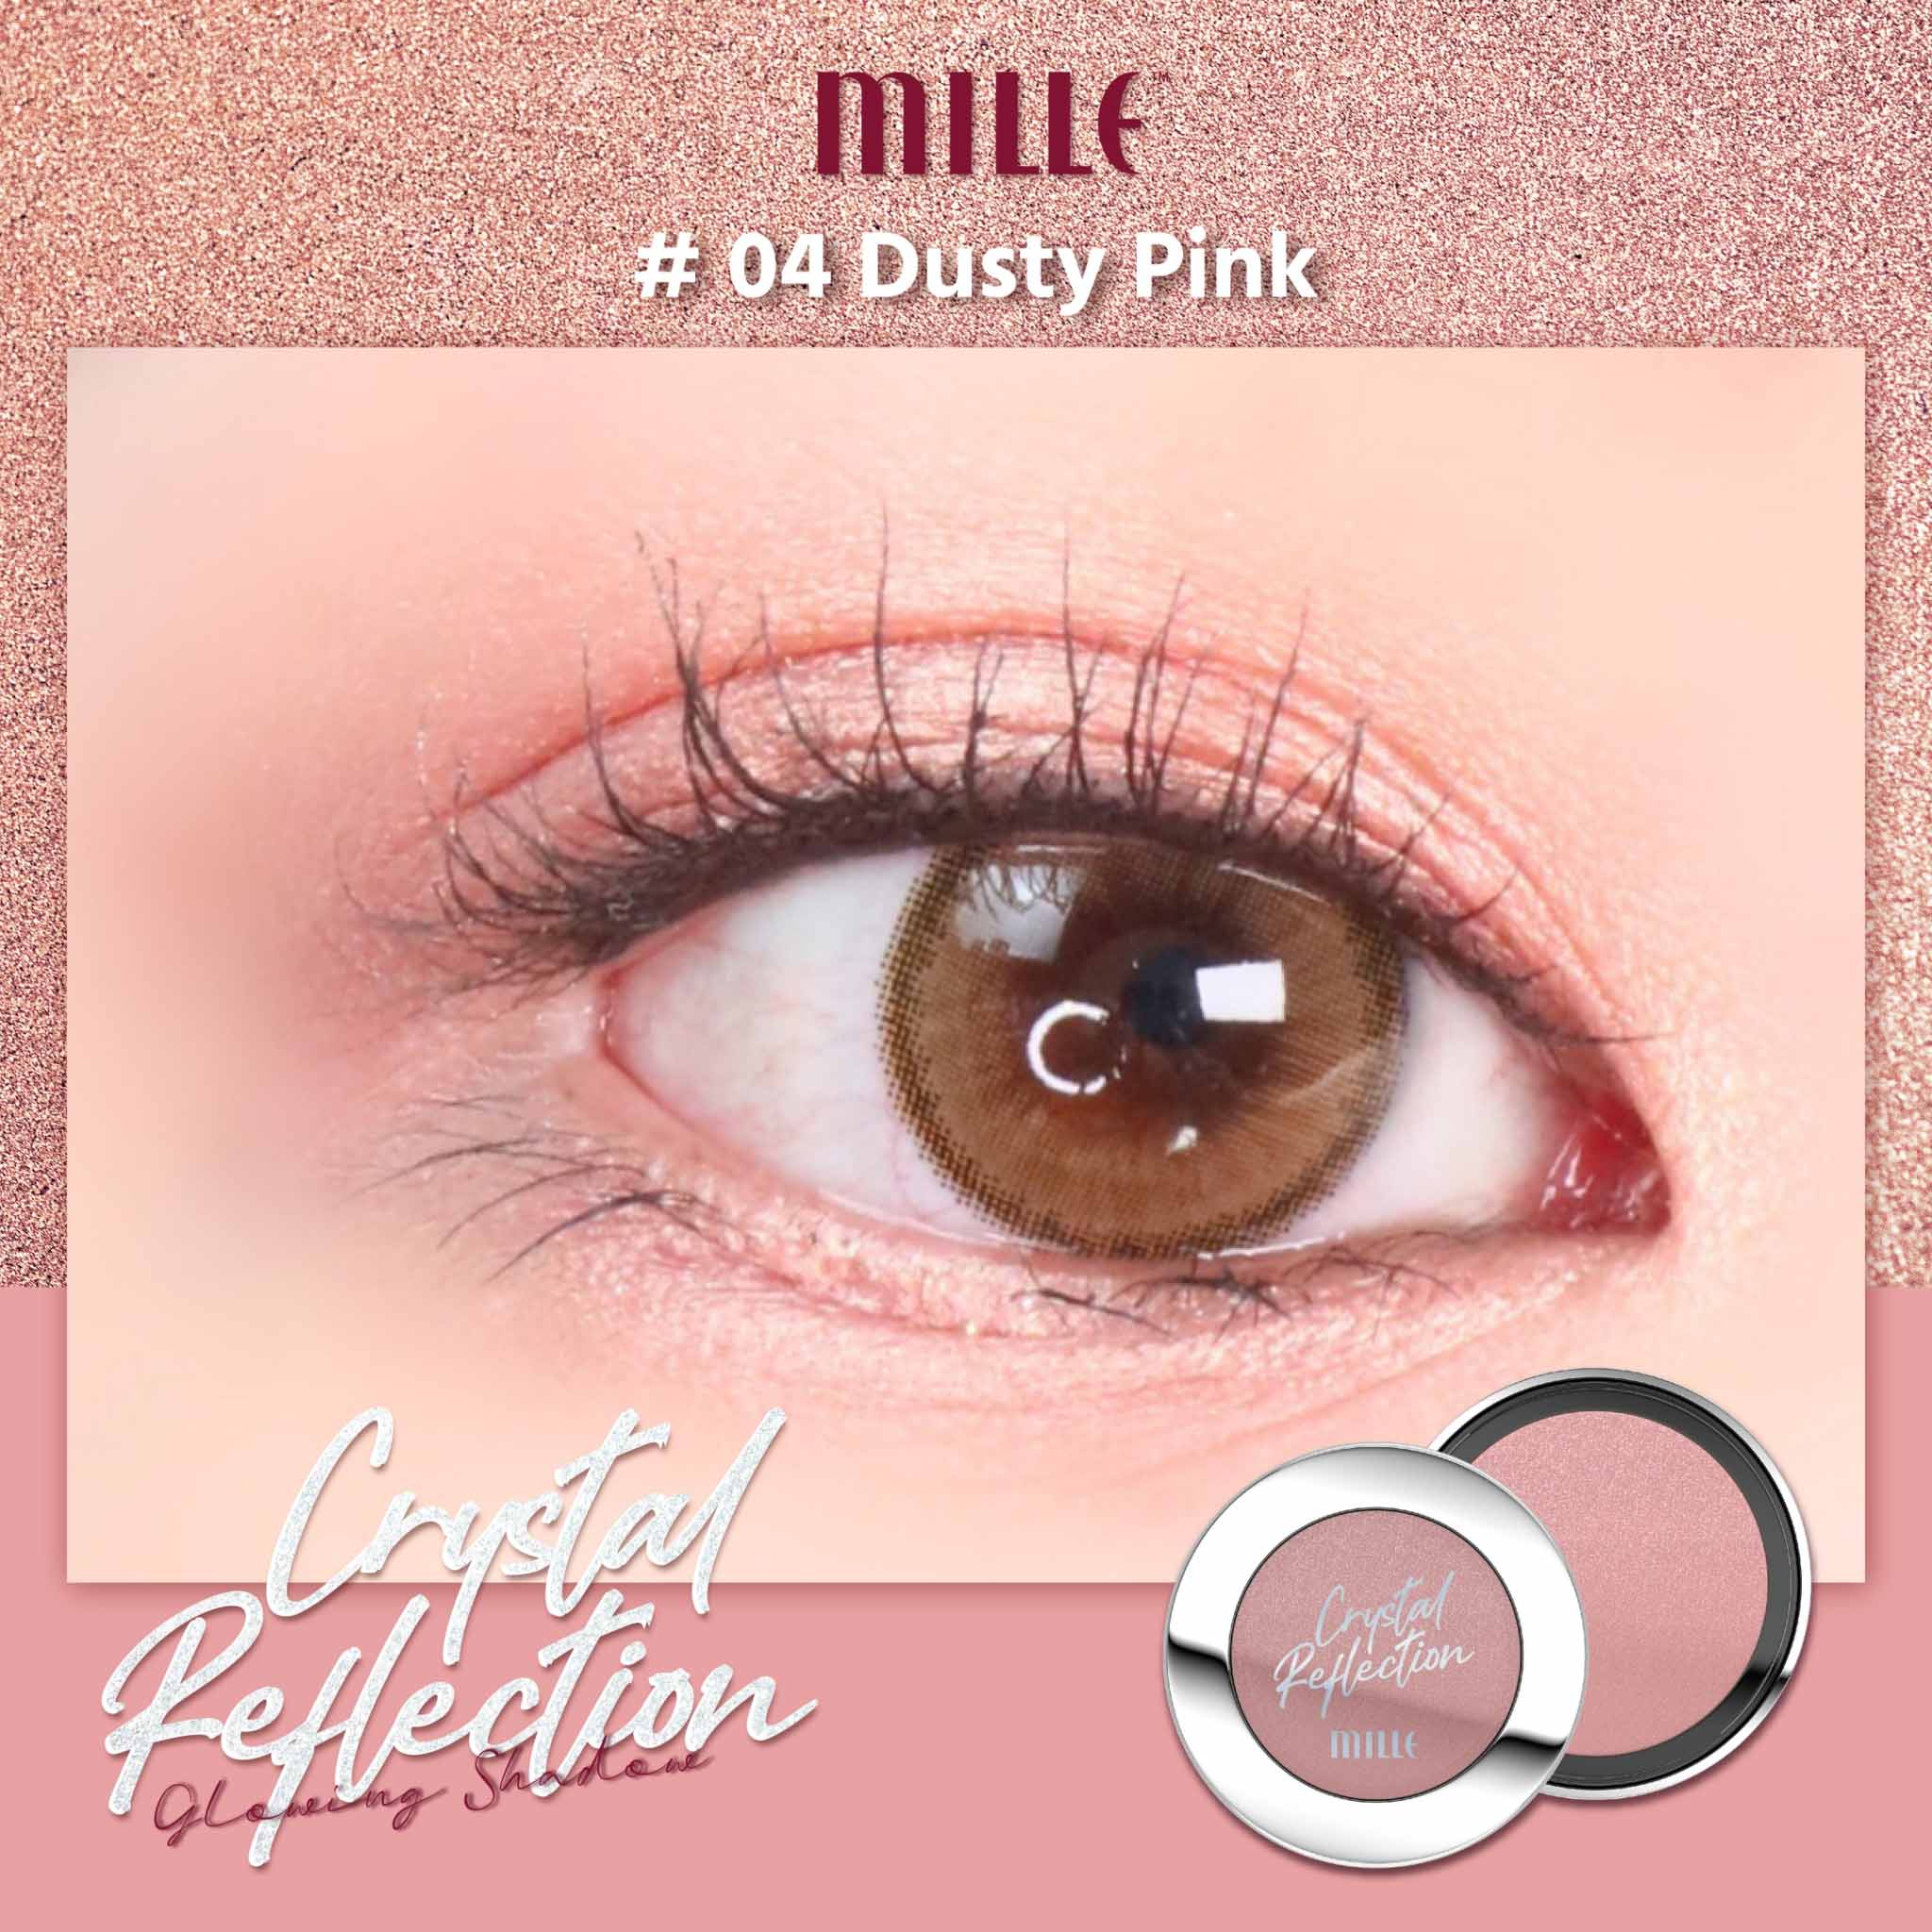 Mille, Mille รีวิว, Mille ราคา, Mille Crystal Reflection Glowing Shadow, Mille Crystal Reflection Glowing Shadow รีวิว, Mille Crystal Reflection Glowing Shadow ราคา, Crystal Reflection Glowing Shadow, Mille Crystal Reflection Glowing Shadow 1.7g, Mille Crystal Reflection Glowing Shadow #04 Dusty Pink, คริสตัลชาโดว์, อายแชโดว์, อายแชโดว์ คือ, วิธีทาอายแชโดว์ เกาหลี